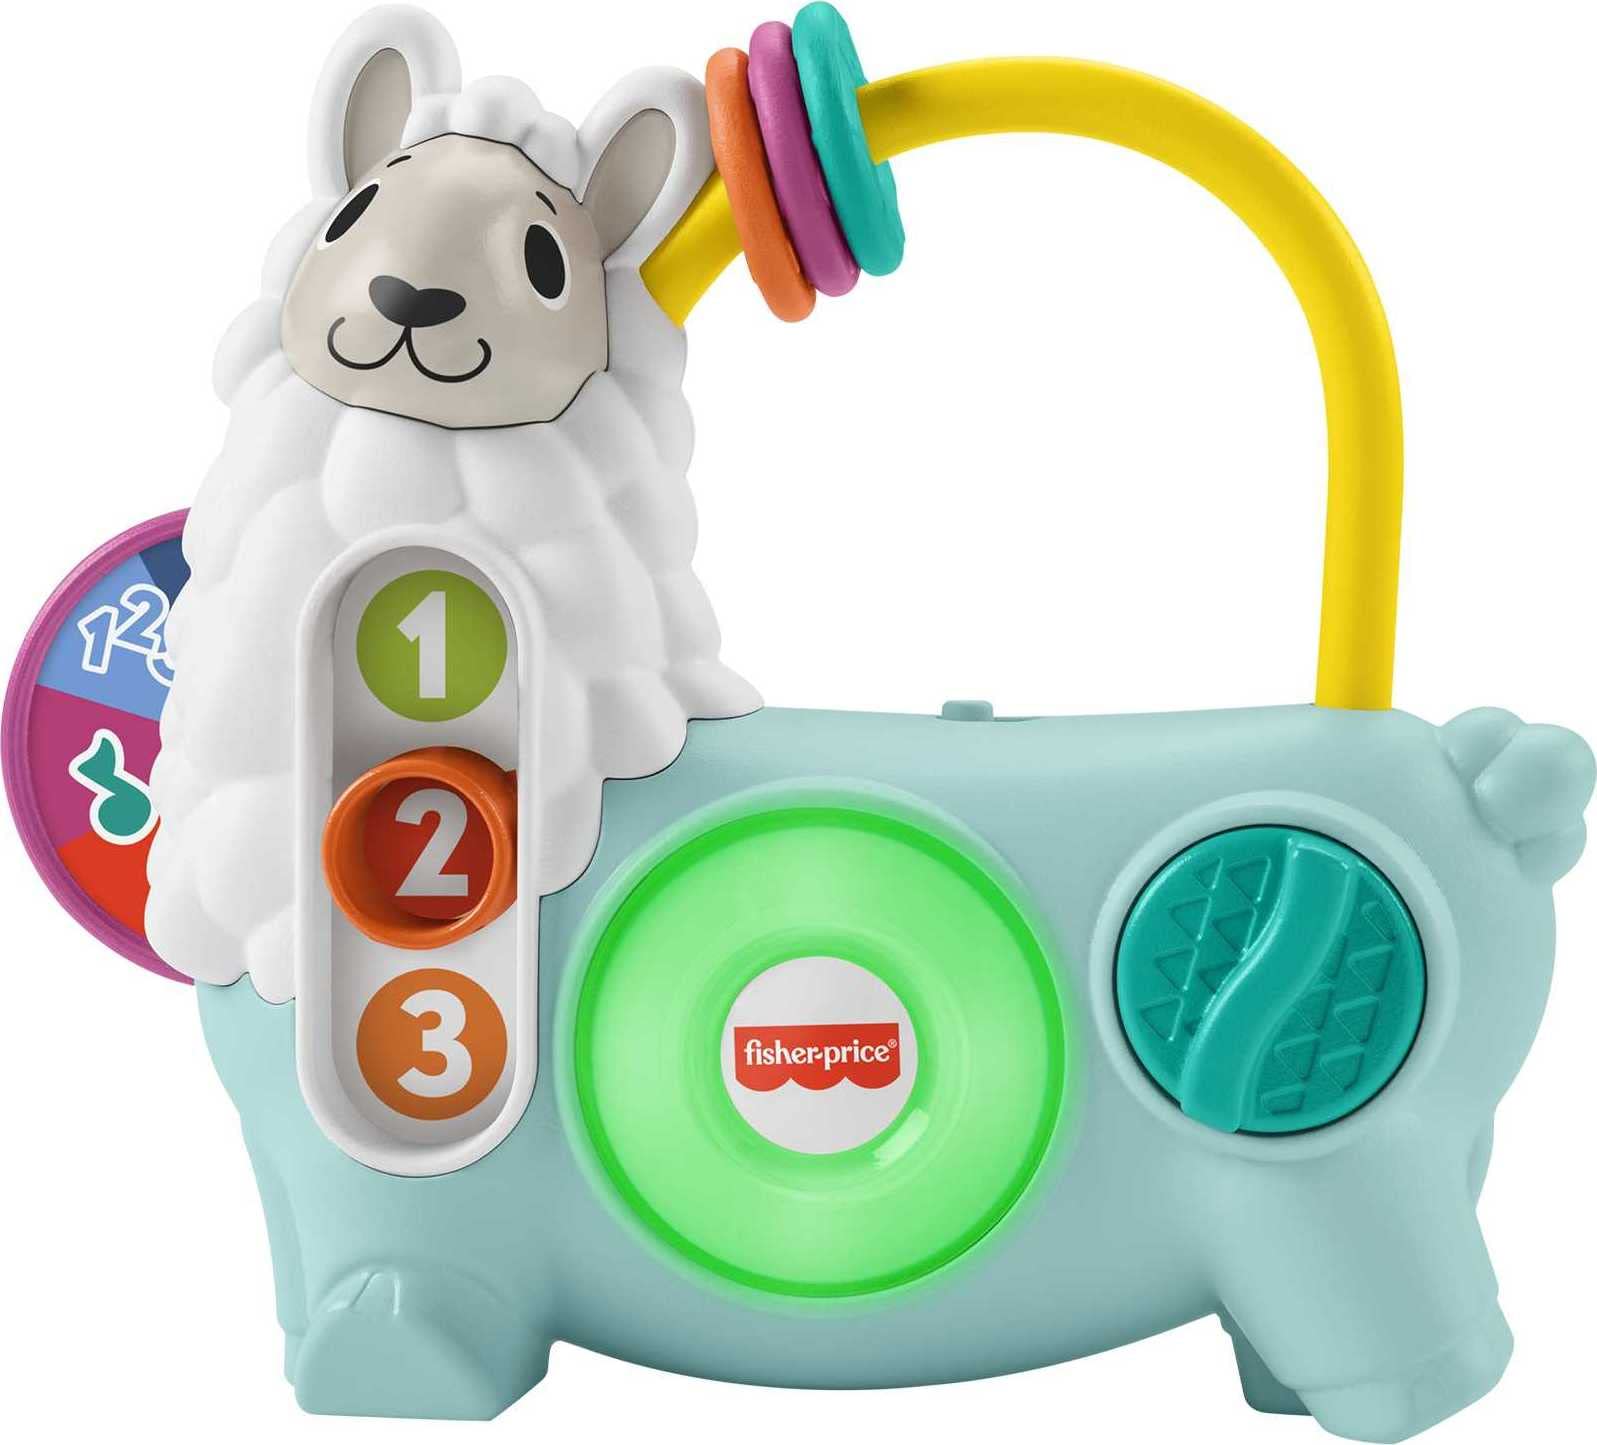 Fisher-Price Baby Linkimals Learning 123 Interactive Llama Toy w/ Lights & Music $9.50 + Free Shipping w/ Prime or on $35+ $18.99